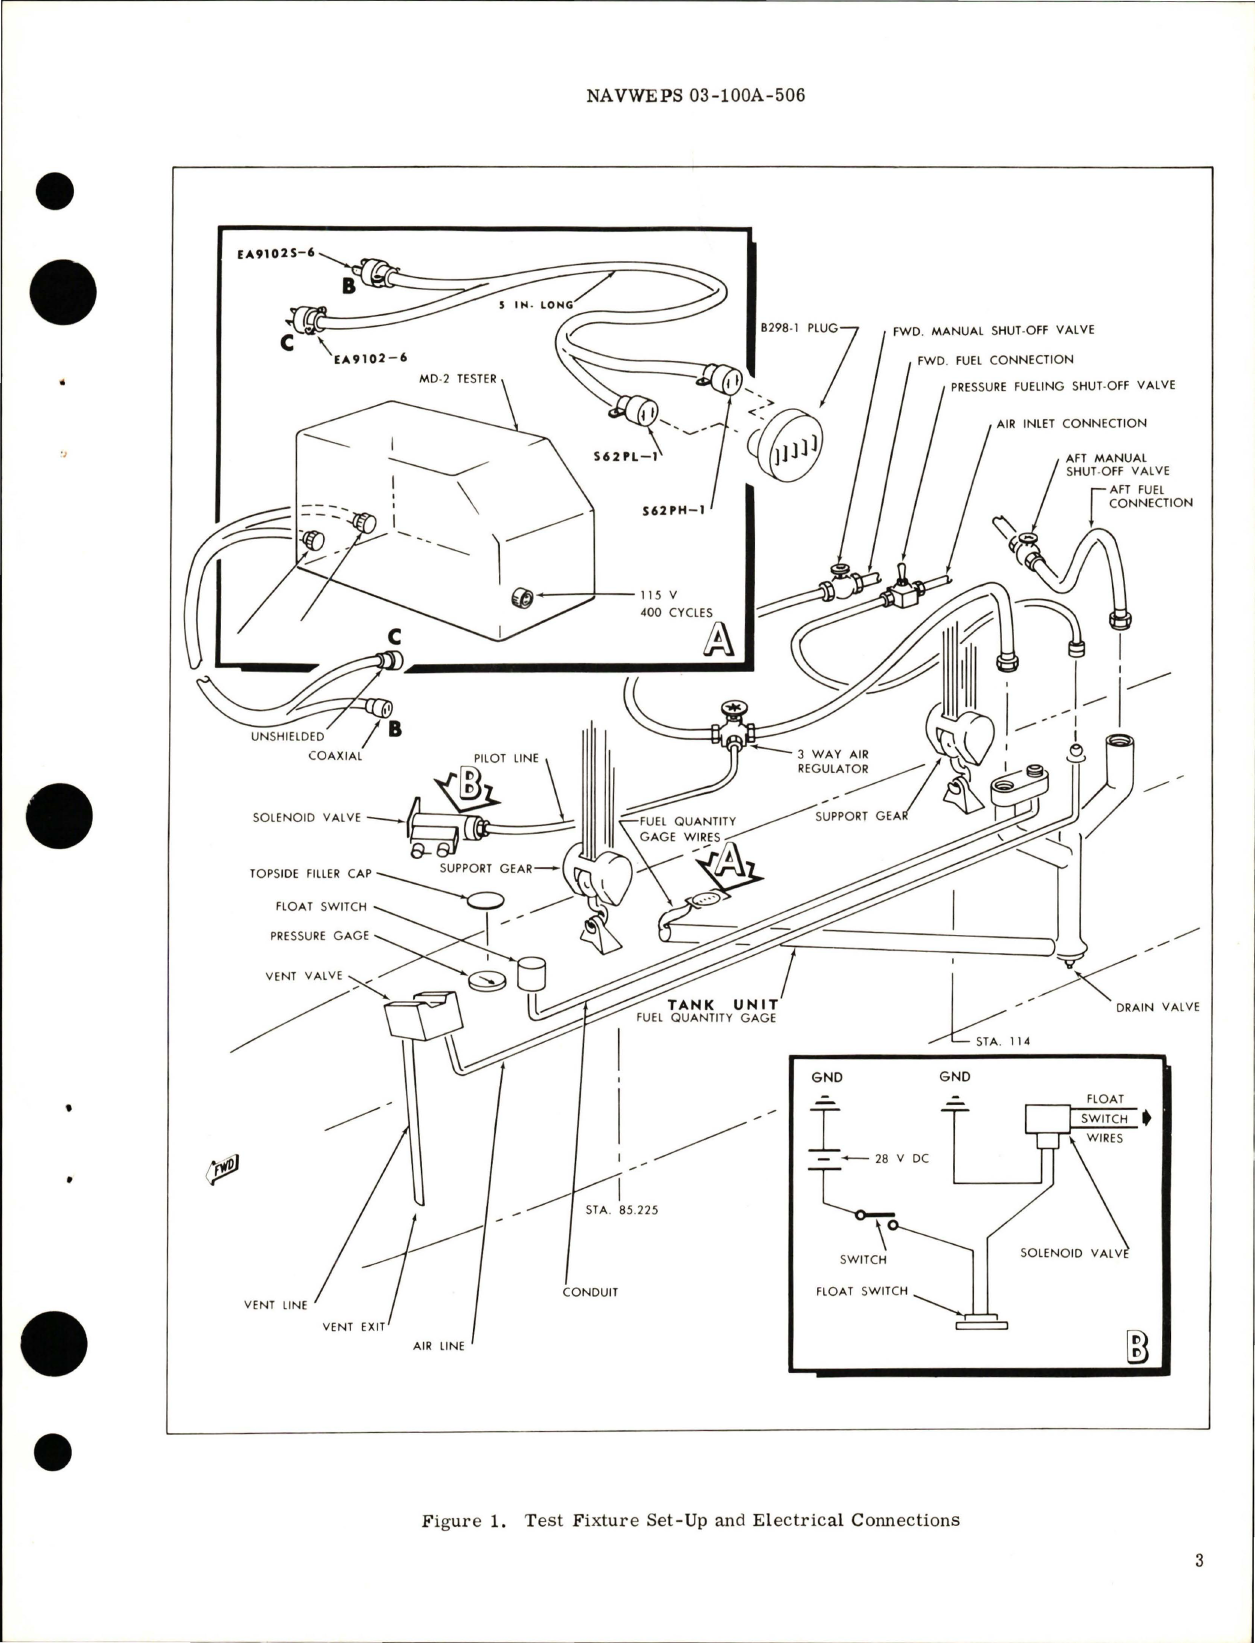 Sample page 5 from AirCorps Library document: Overhaul Instructions with Illustrated Parts Breakdown for Pressurized Fuel Tank - 300 Gal - Parts 225-48000, 225-48000-71, 225-48000-73, 225-48000-75, and 225-48000-89